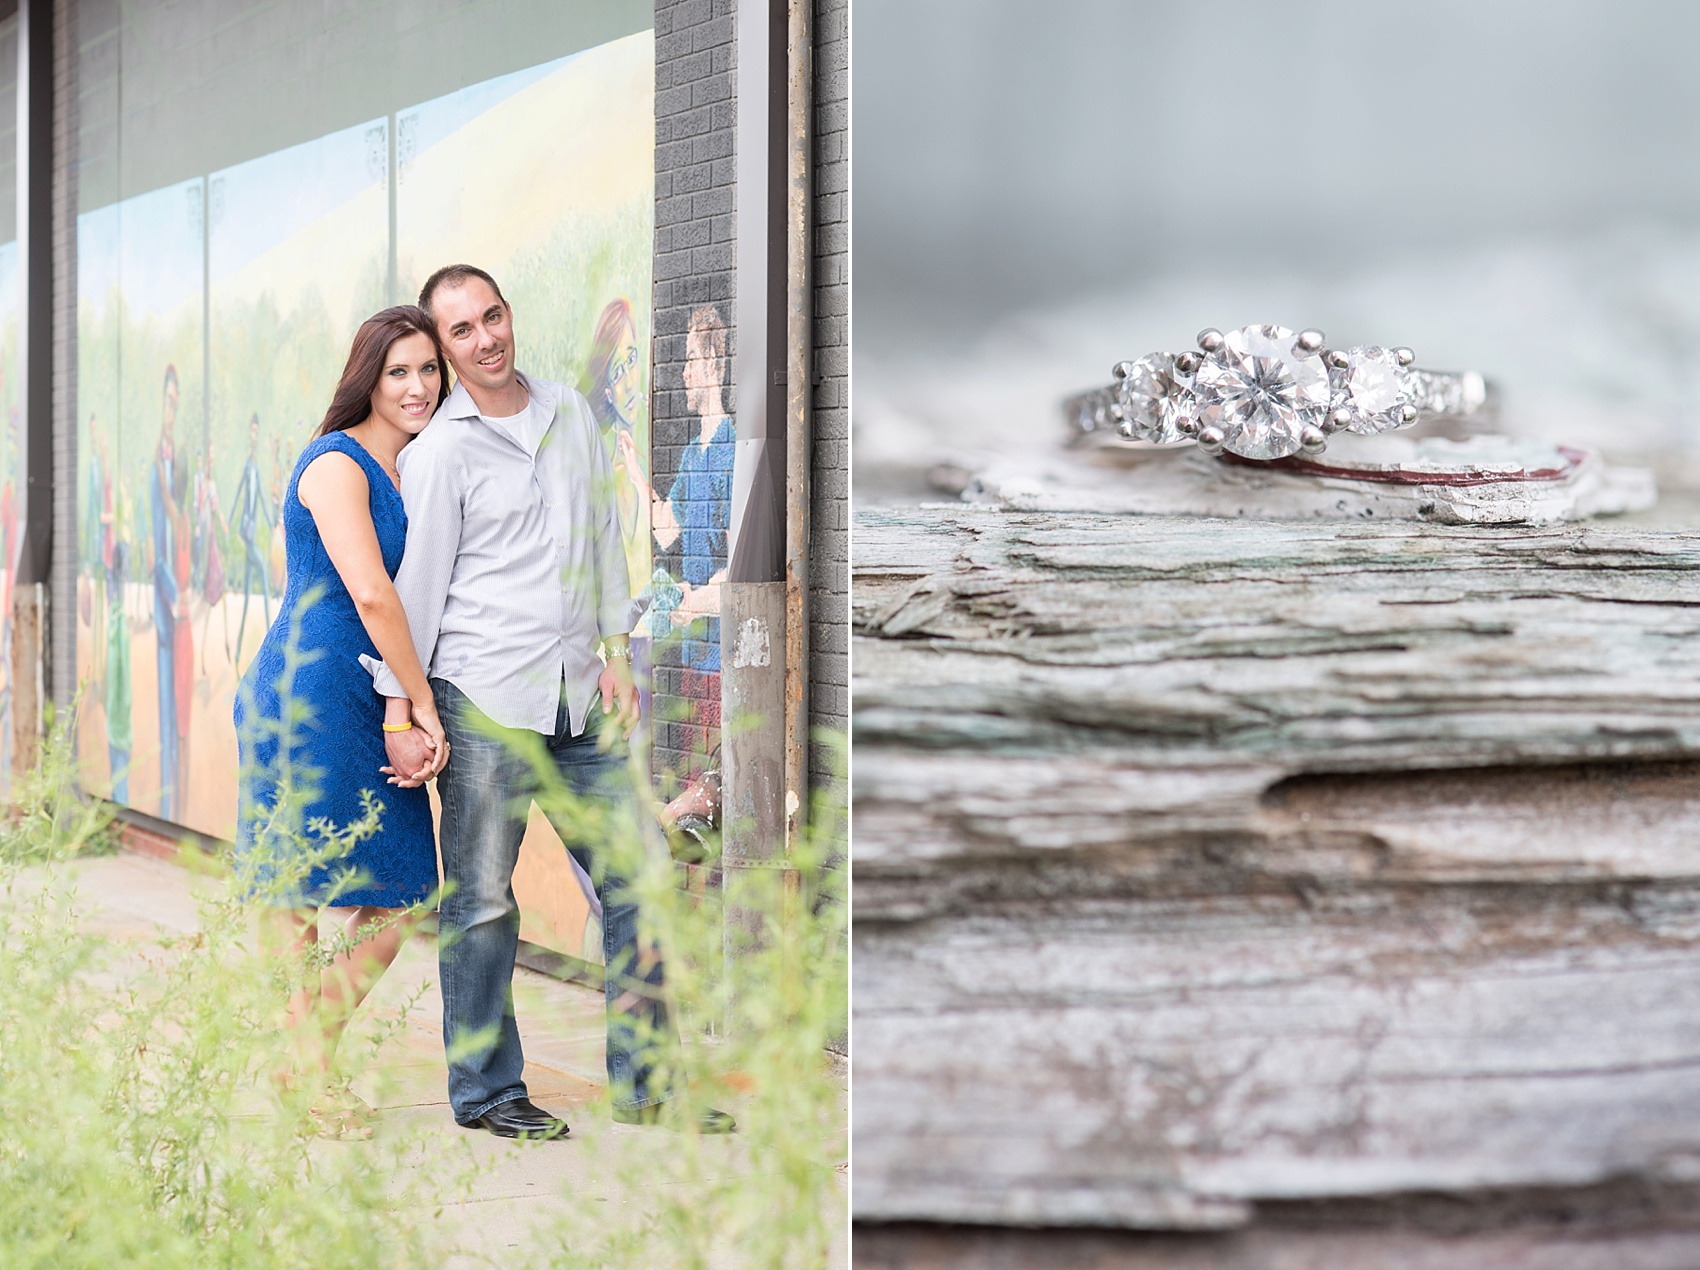 Downtown Raleigh urban engagement photos by Mikkel Paige Photography. Three stone diamond engagement ring detail.